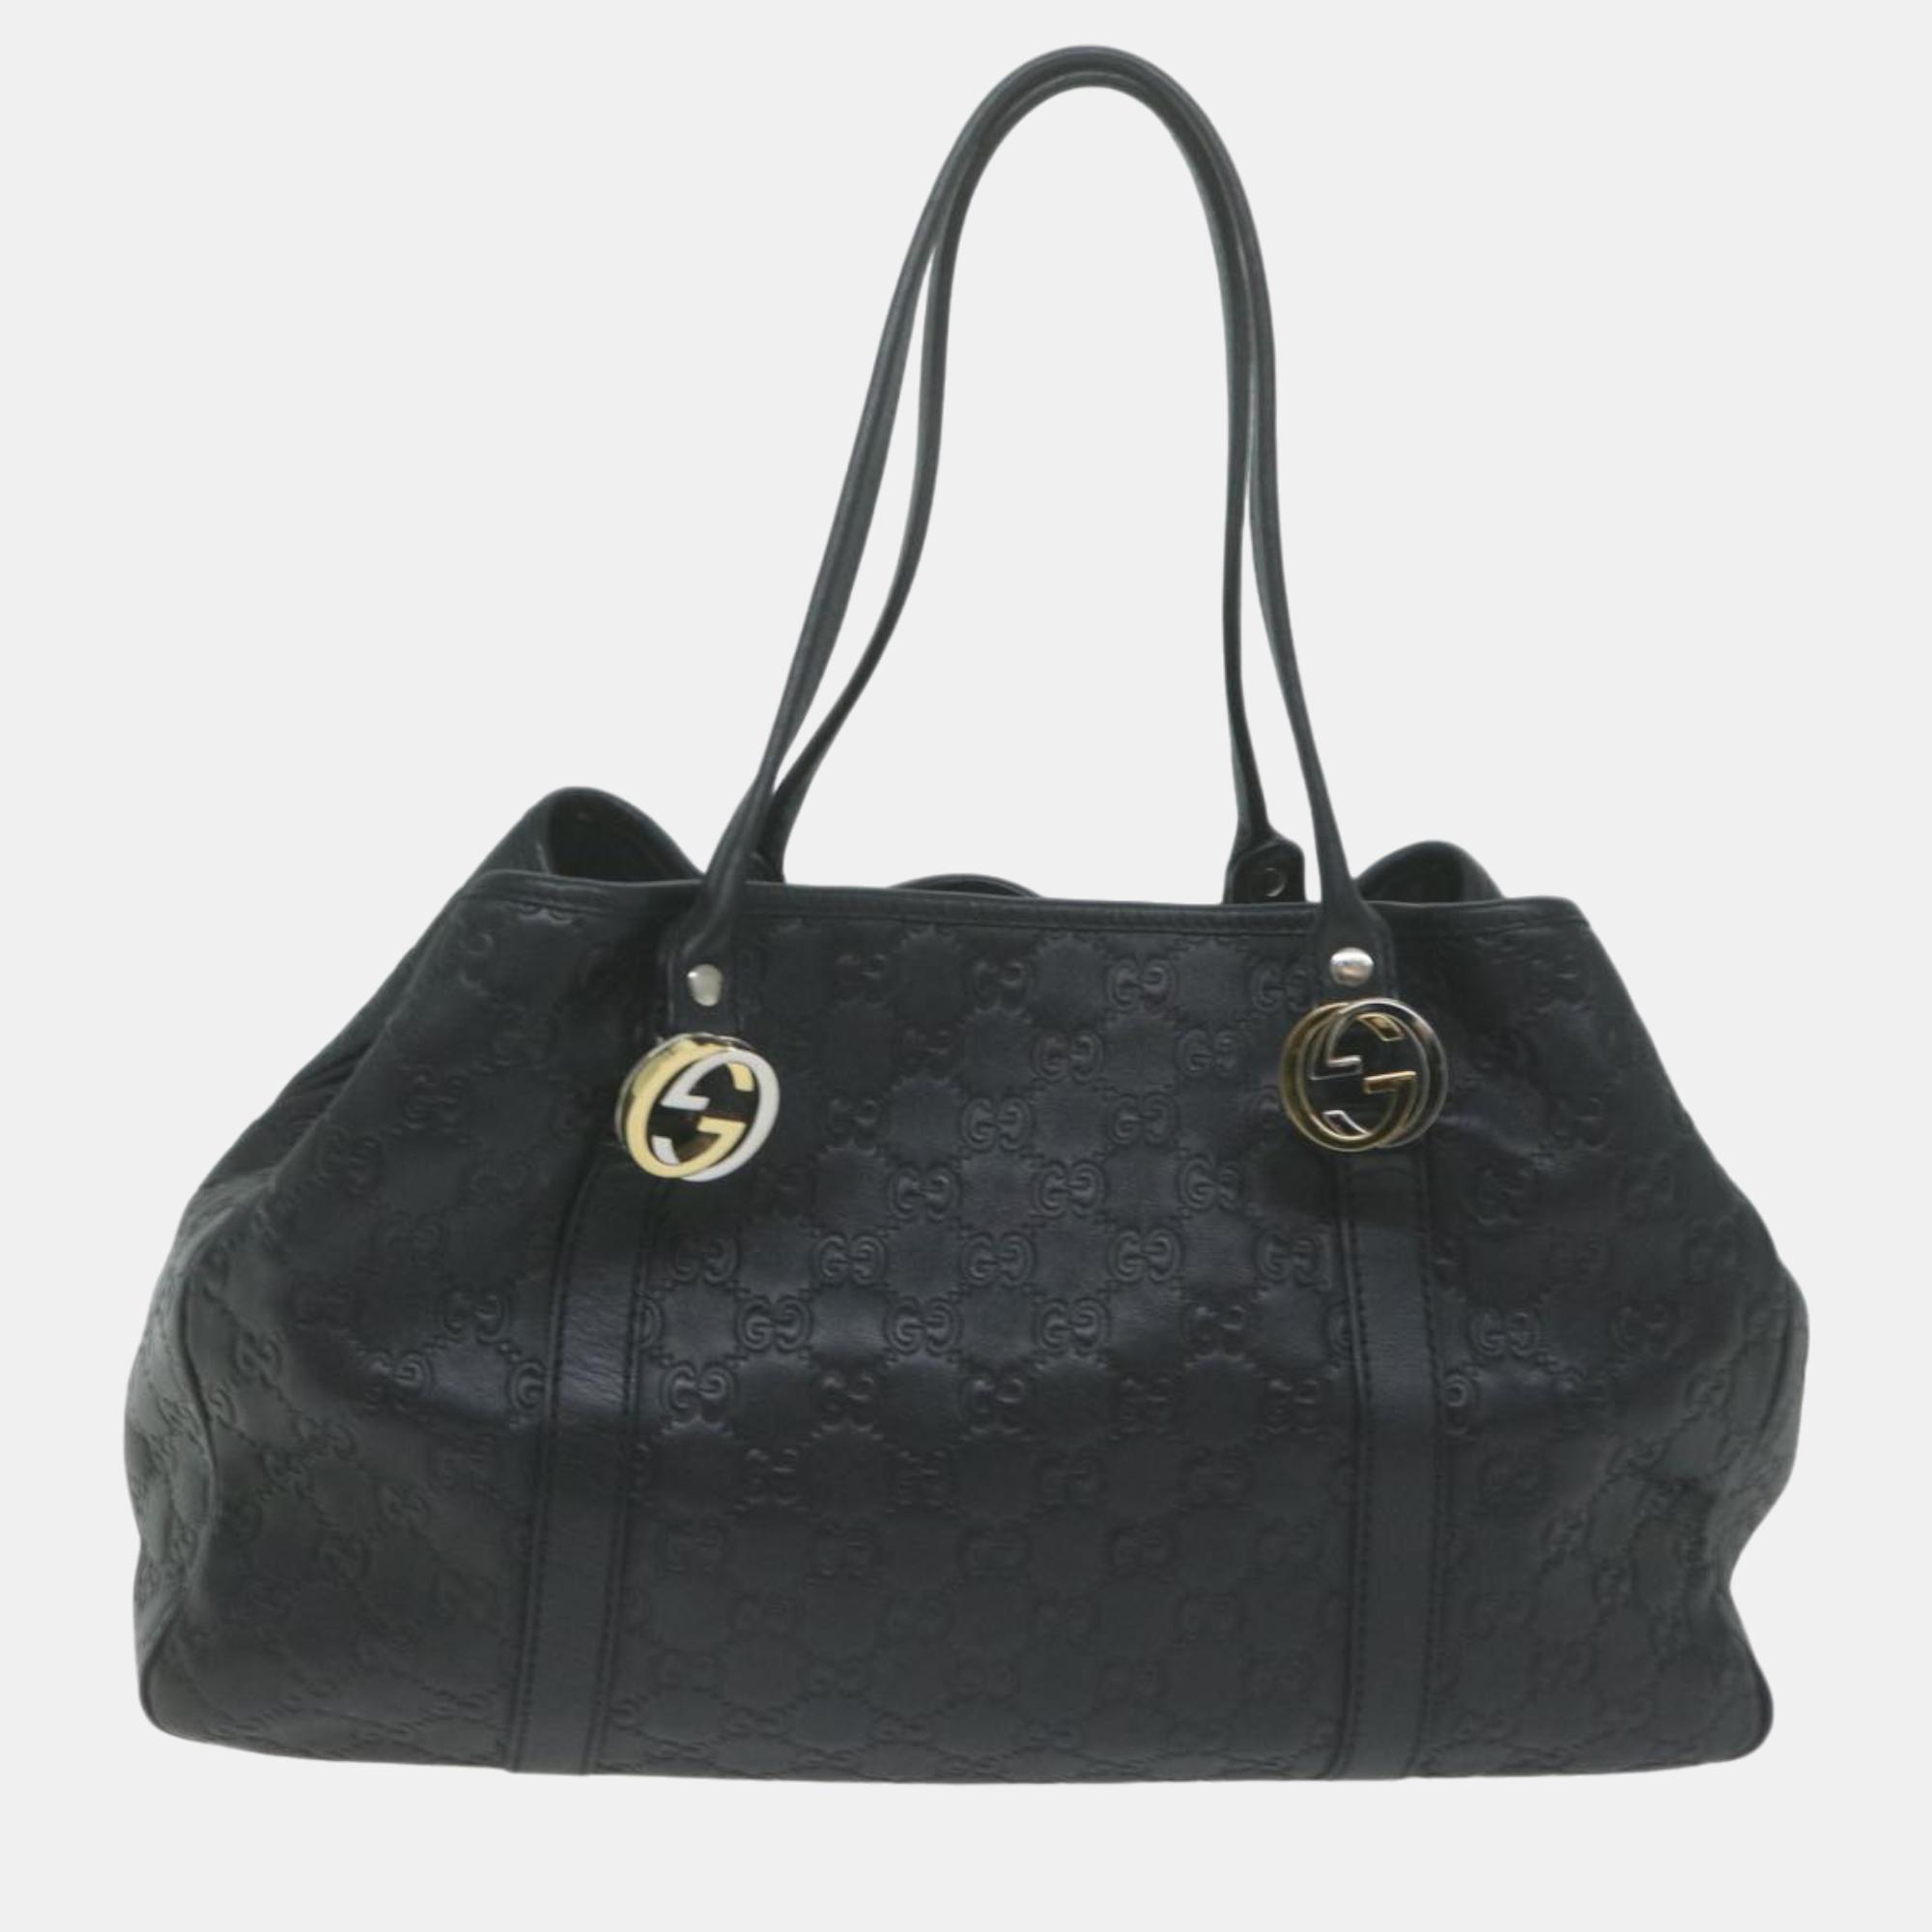 Uncompromising in quality and design this Gucci tote is a must have in any wardrobe. With its durable construction and luxurious finish its the perfect accessory for any occasion.